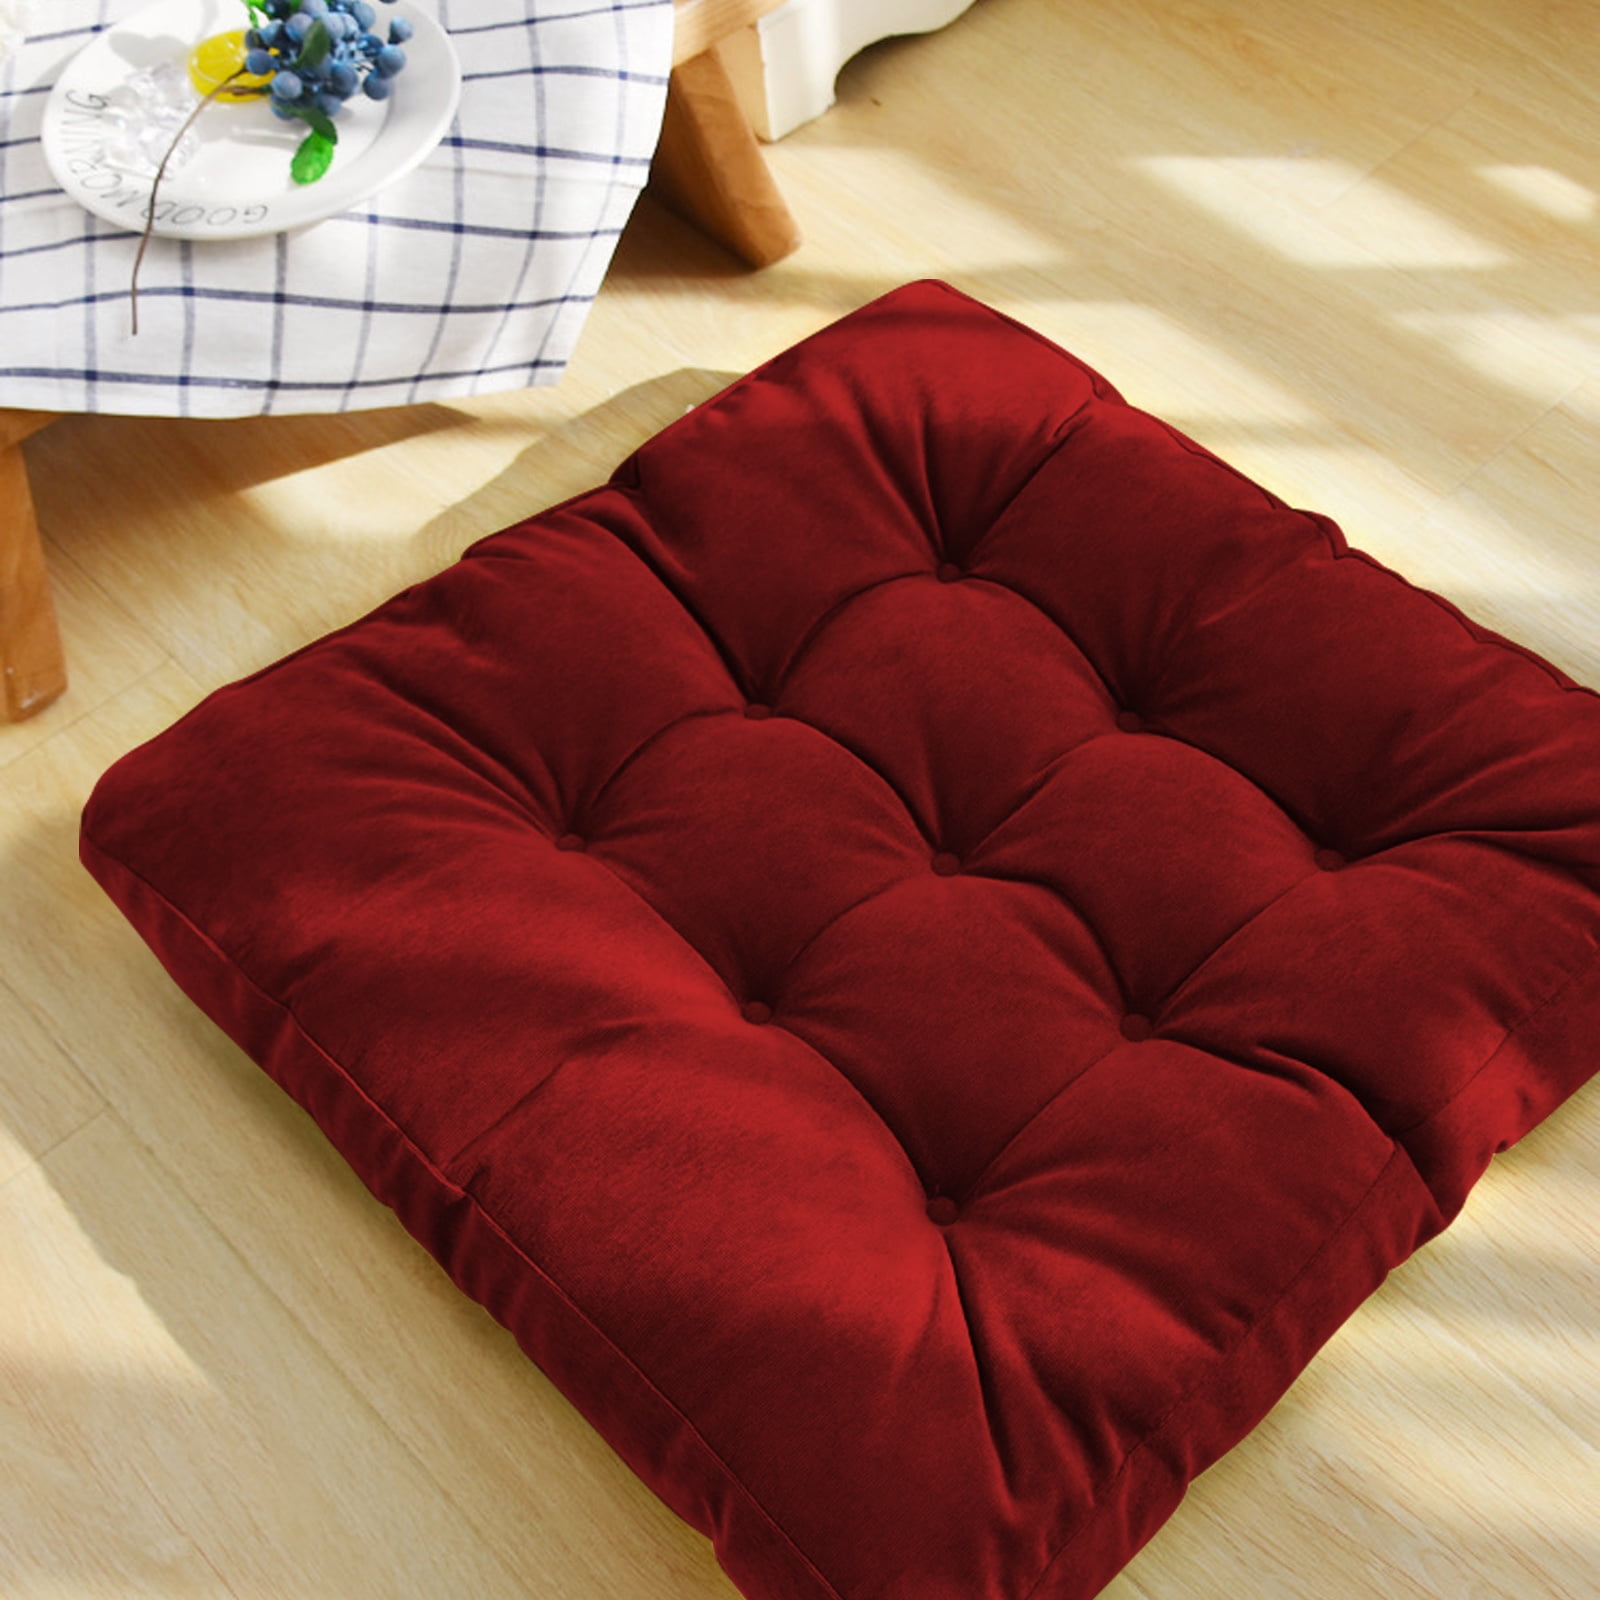 Large Floor Pillows Seating Adults  Floor Cushions Large Adults - Floor  Pillows - Aliexpress